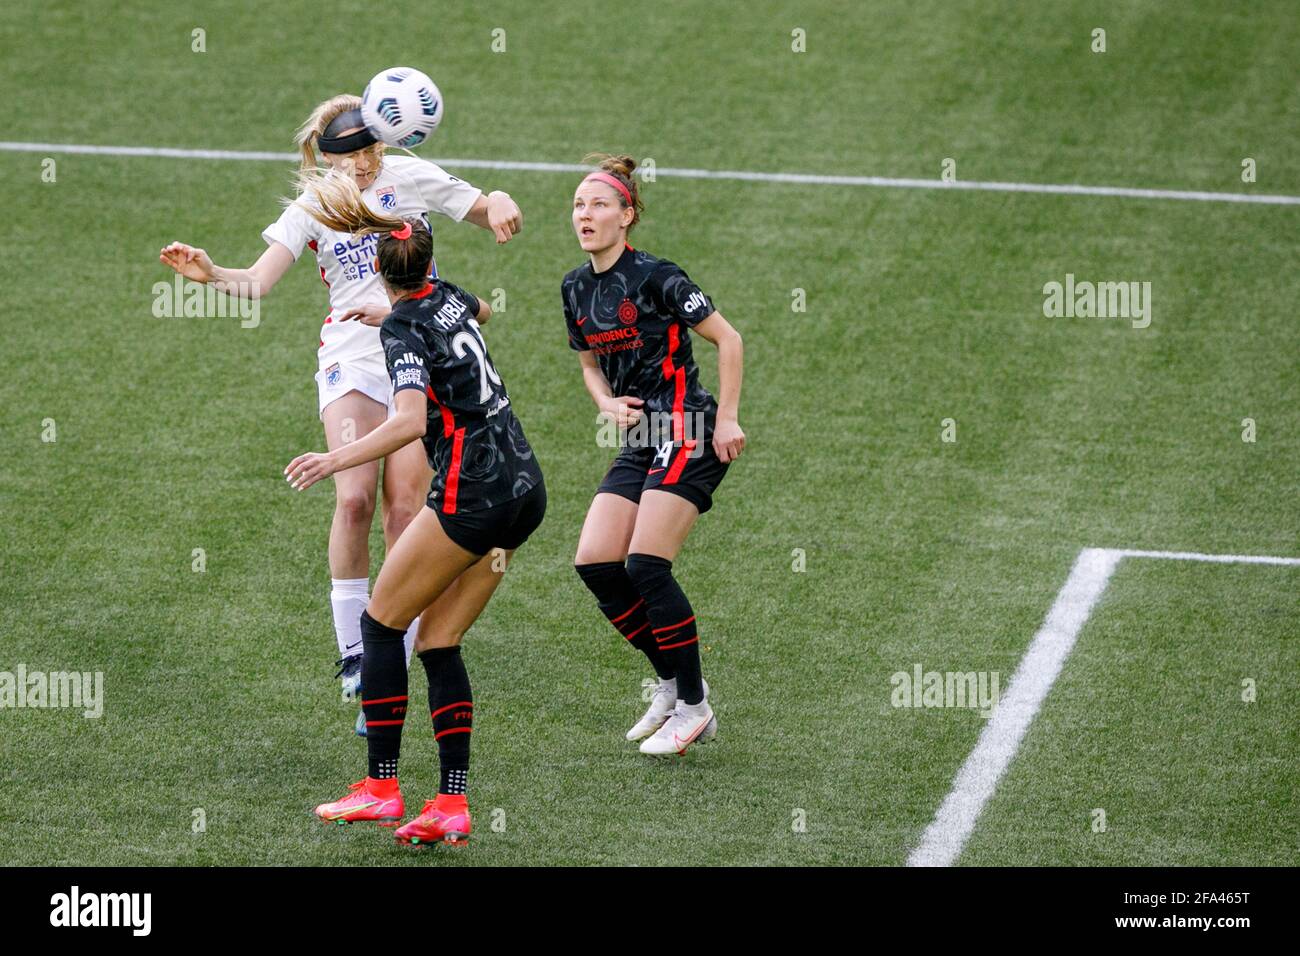 Portland, USA. 21st Apr, 2021. The Thorns' Kelli Hubli (20) goes for a header. The Portland Thorns FC beat Tacoma's OL Reign 2-0 at Providence Park in Portland, Oregon on April 21, 2021, which sends the Thorns to the Challenge Cup finals at home on May 8. (Photo by John Rudoff/Sipa USA) Credit: Sipa USA/Alamy Live News Stock Photo